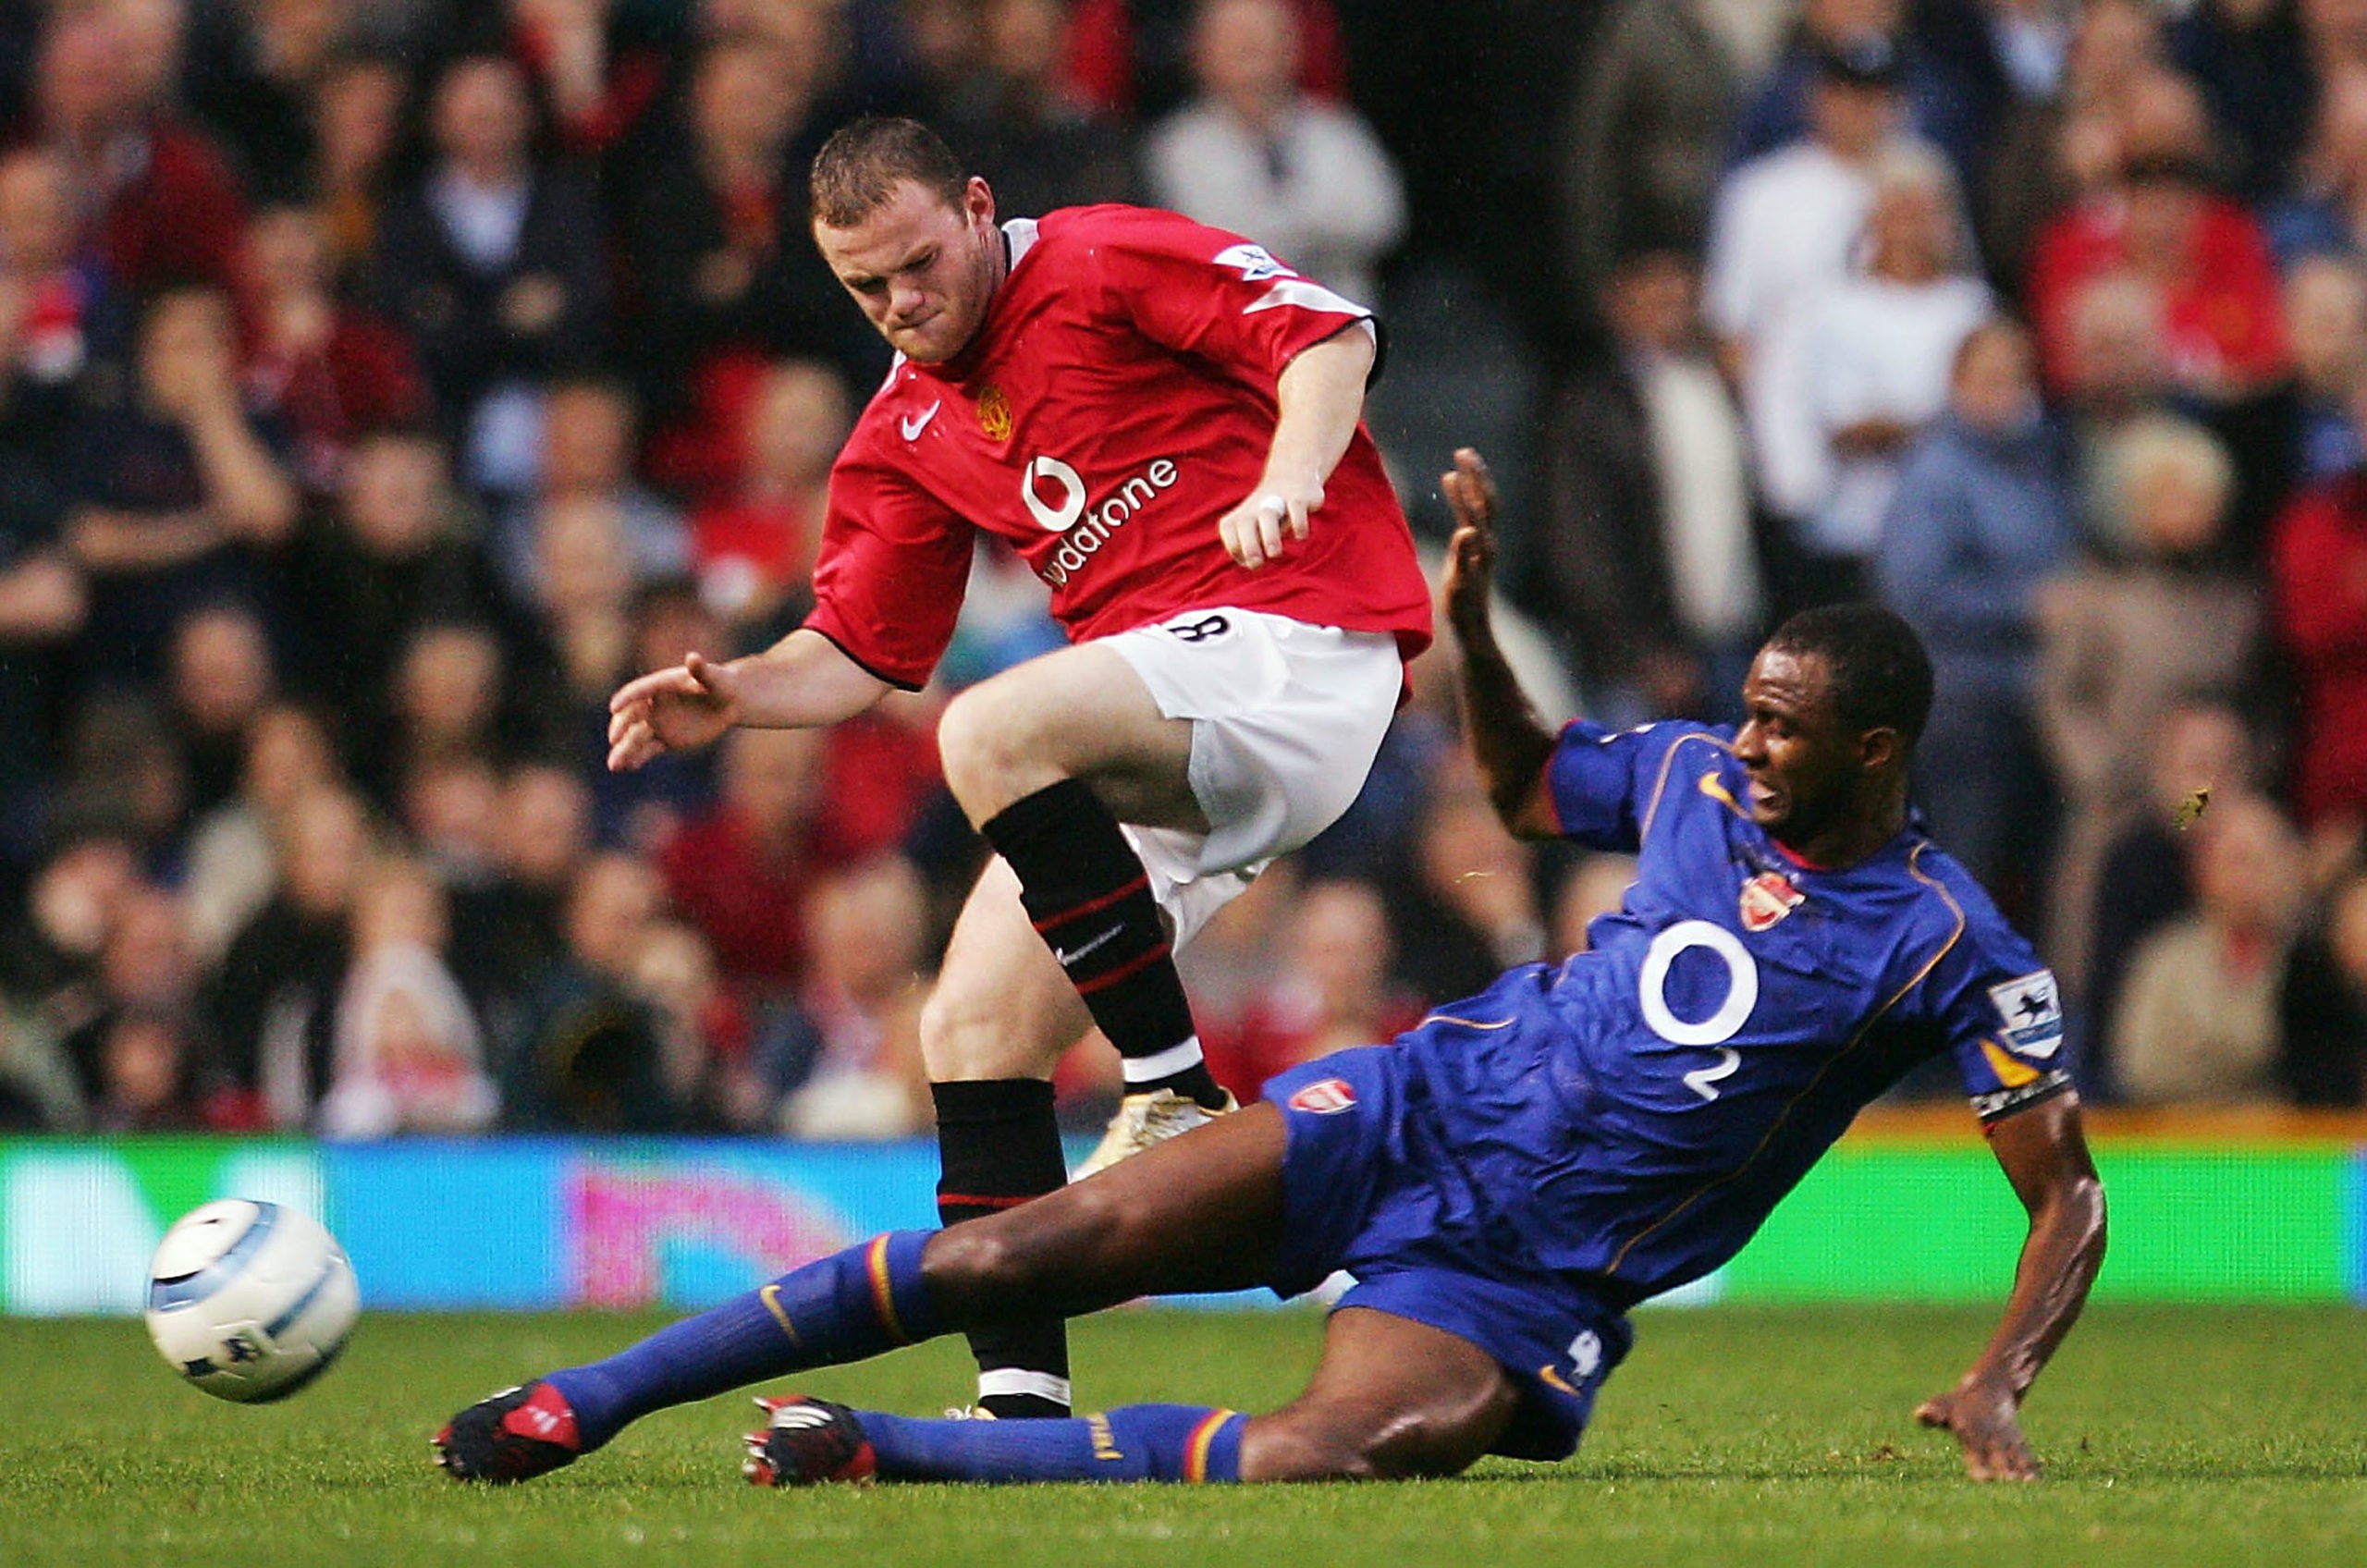 Arsenal's Invincibles 49 undefeated MANCHESTER, ENGLAND - OCTOBER 24: Wayne Rooney of Manchester United battles with Patrick Vieira of Arsenal during the FA Barclays Premiership match between Manchester United and Arsenal at Old Trafford on October 24, 2004 in Manchester, England. (Photo by Laurence Griffiths/Getty Images)